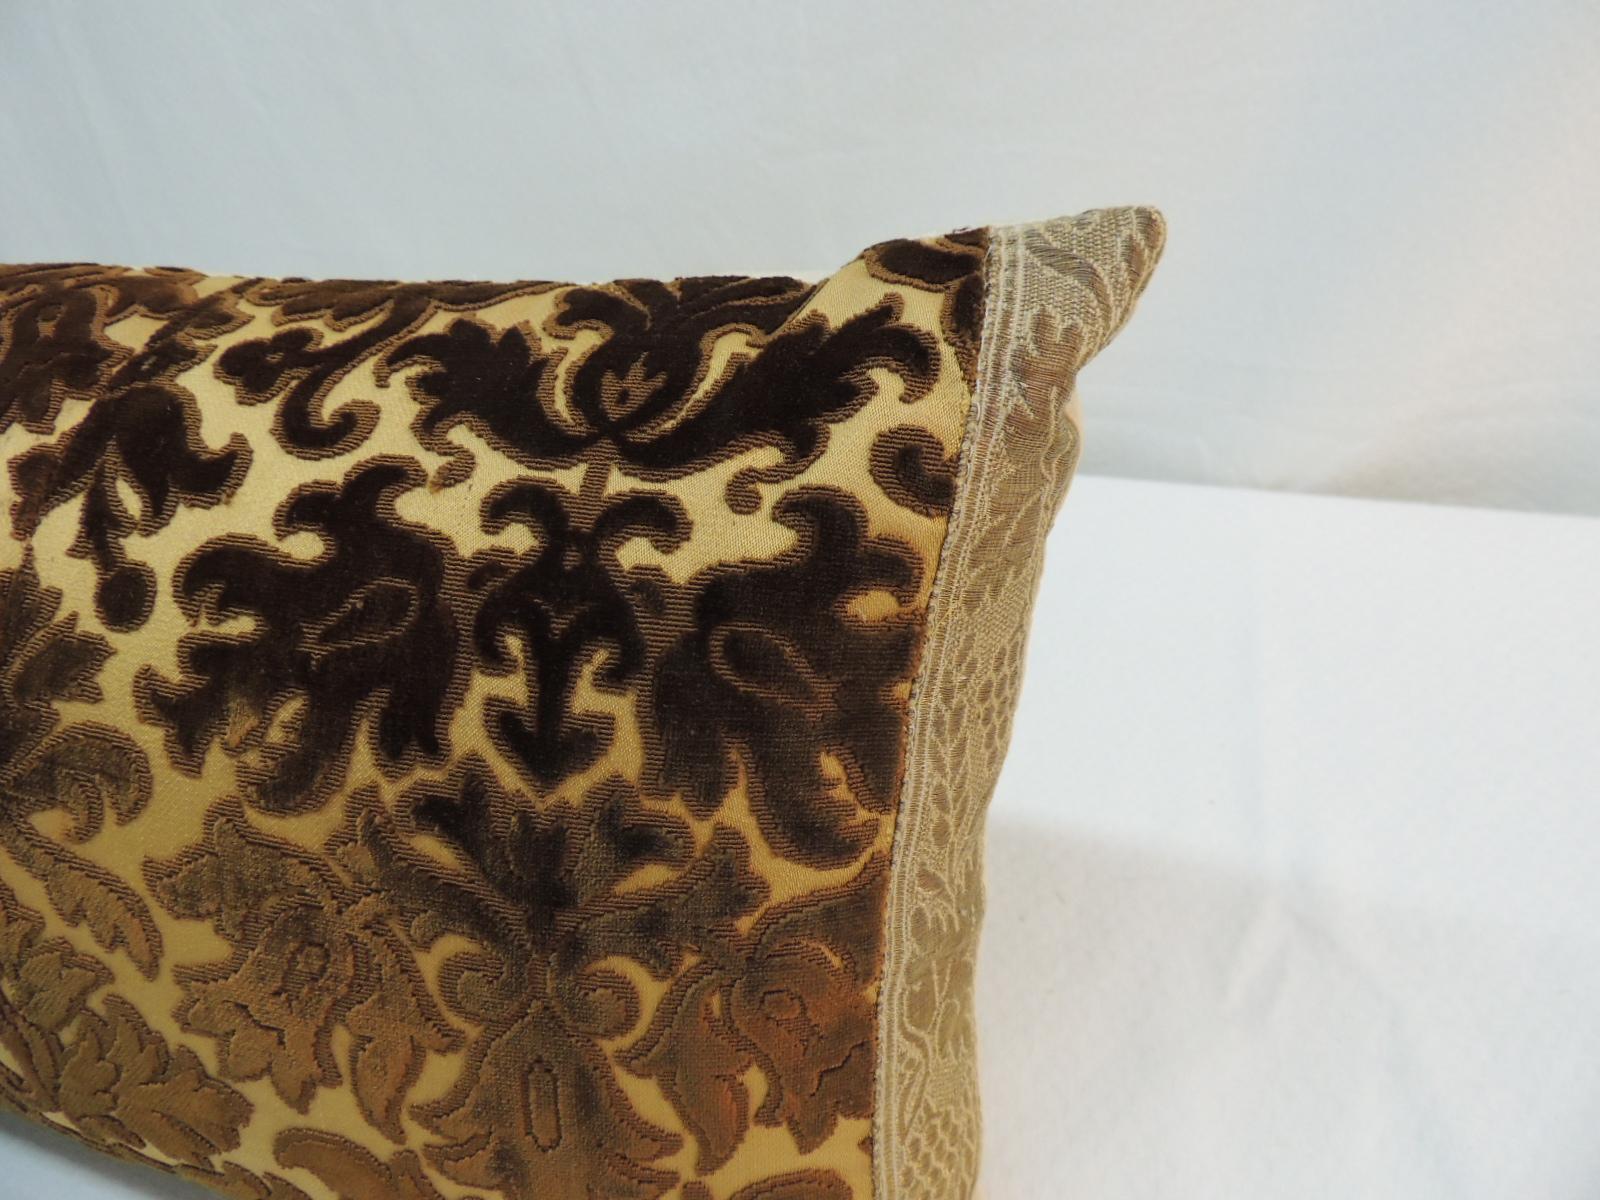 18th century silk brown velvet bolster decorative pillow framed with an 18th century gold metallic trim. The front antique panel of this decorative pillow has been carefully lined to add strength and durability to the antique velvet bolster pillow.